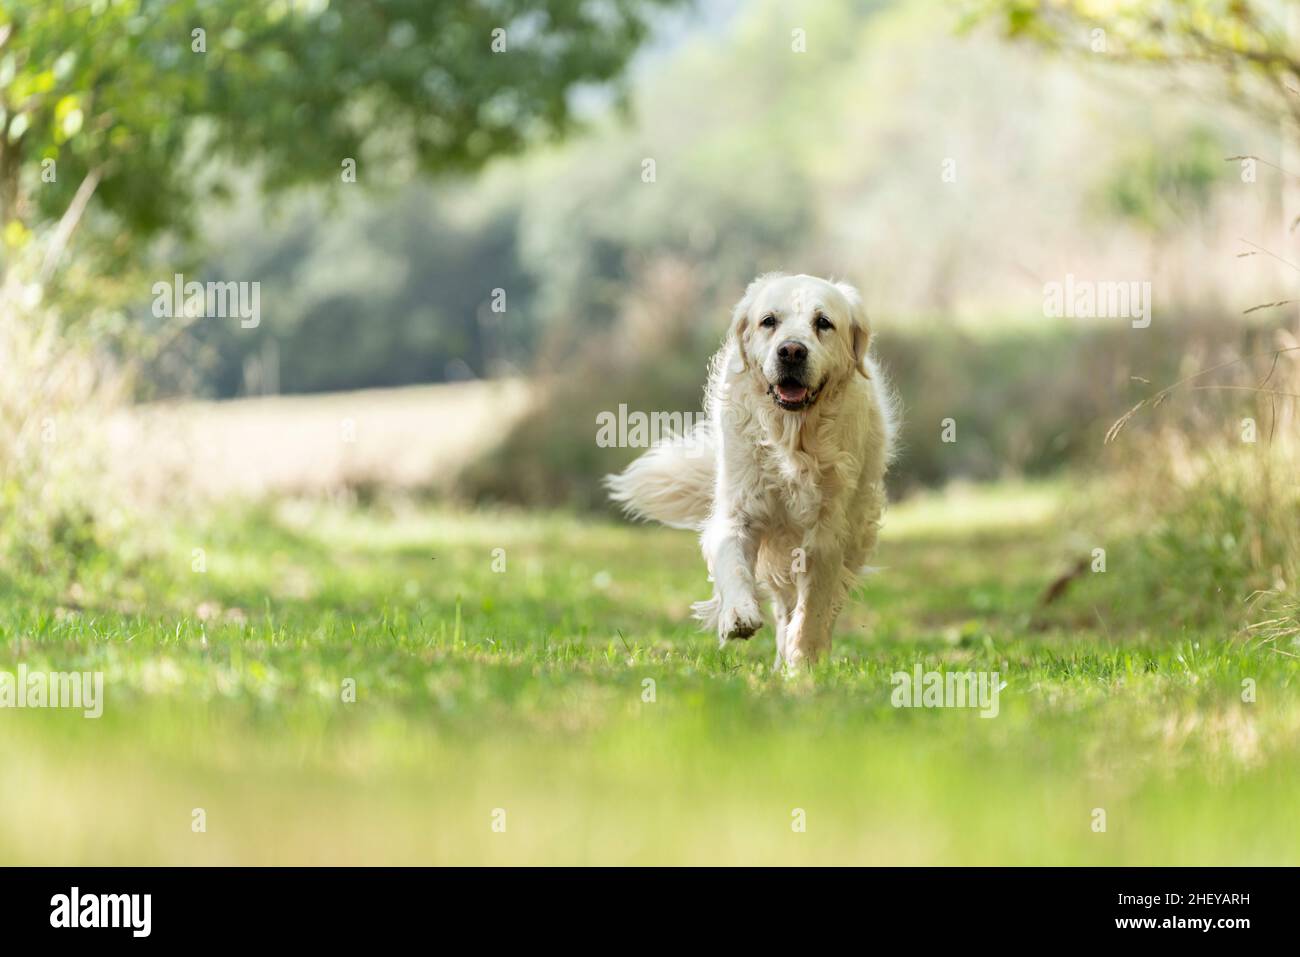 Large white dog running towards the camera down a grassy path Stock Photo